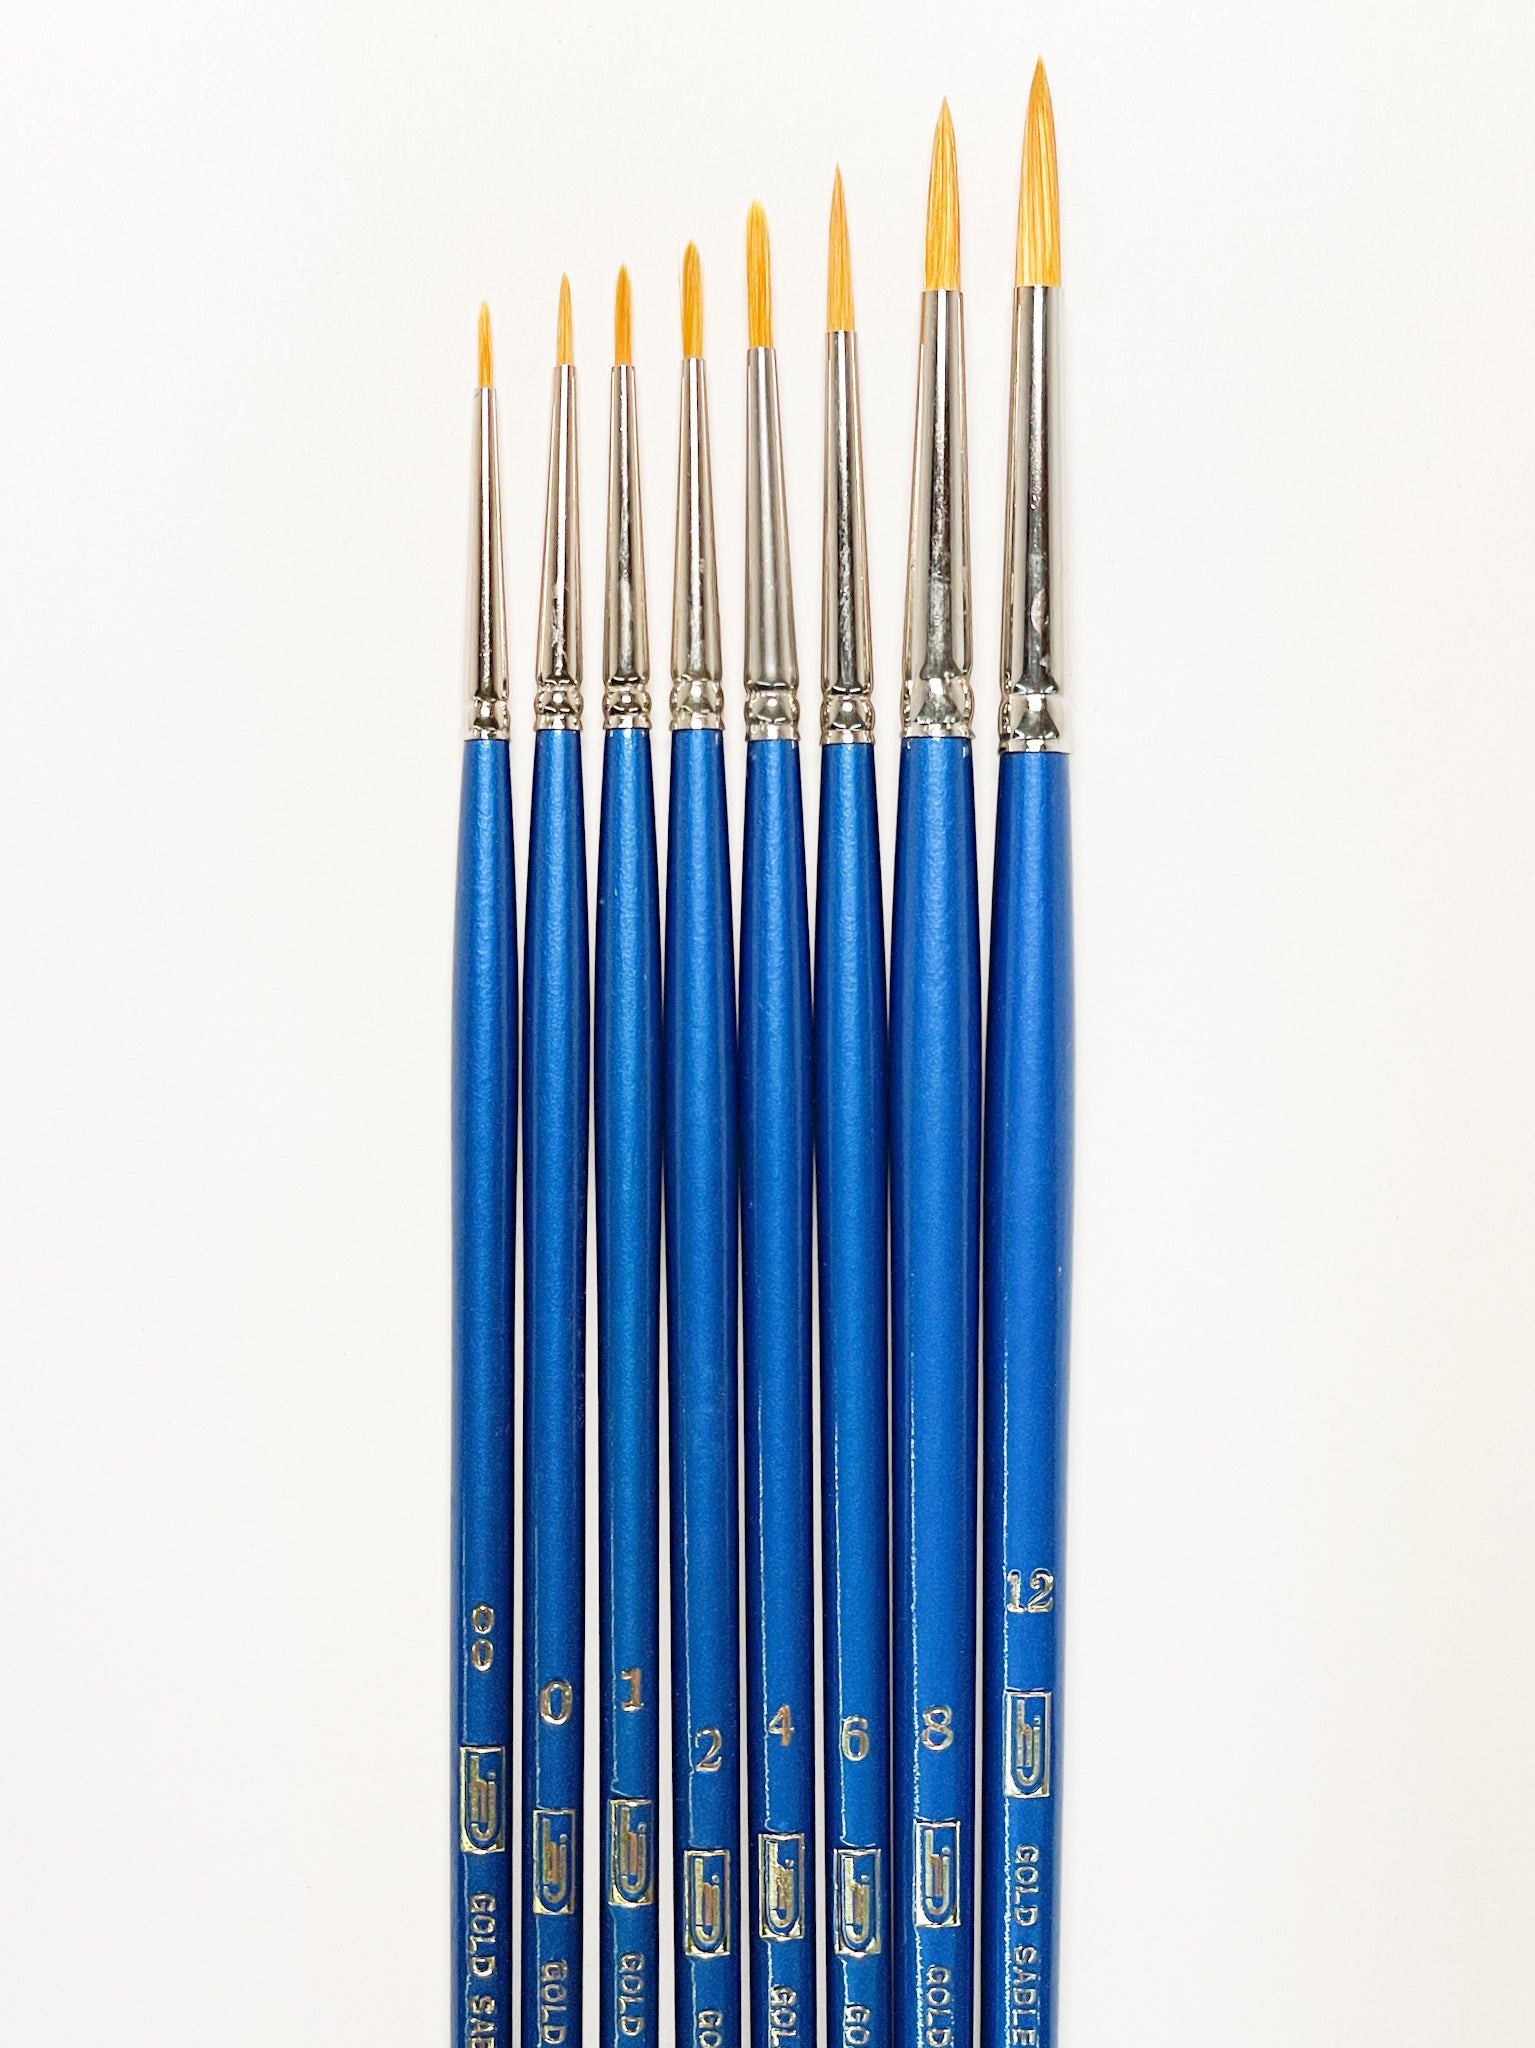 Heinz Jordan Series 600-R Gold Sable Round Paint Brushes (Oil & Acrylic)